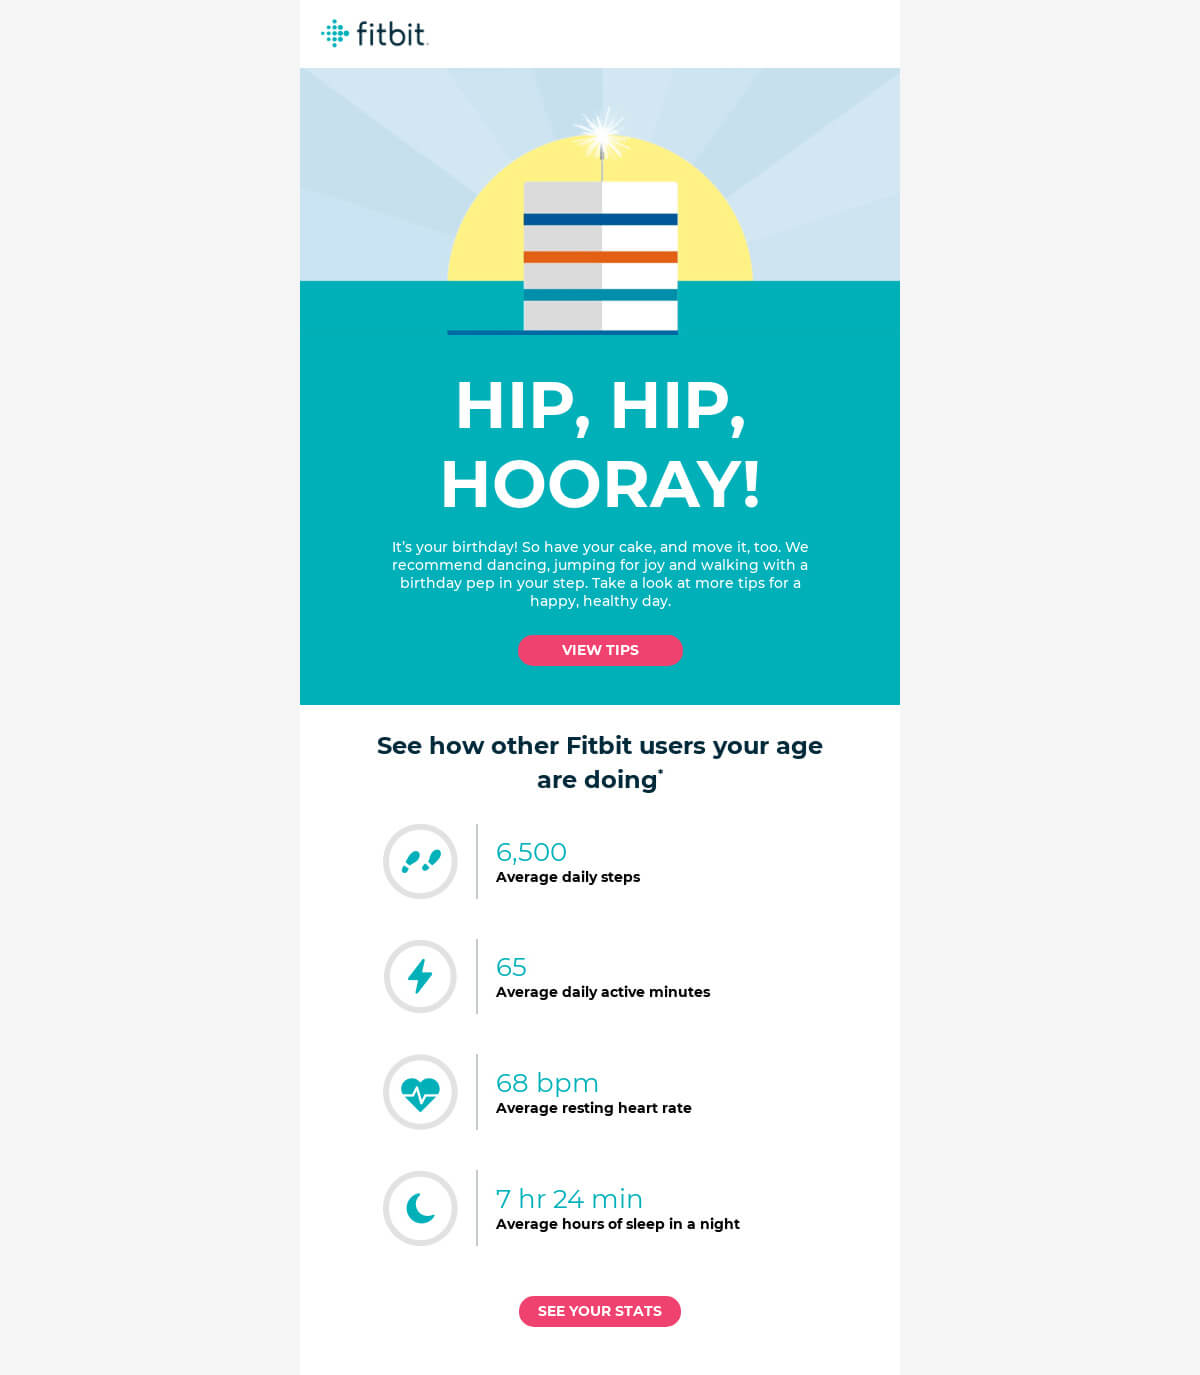 Fitbit wishing its users a happy birthday by encouraging them to be more active for a healthier life